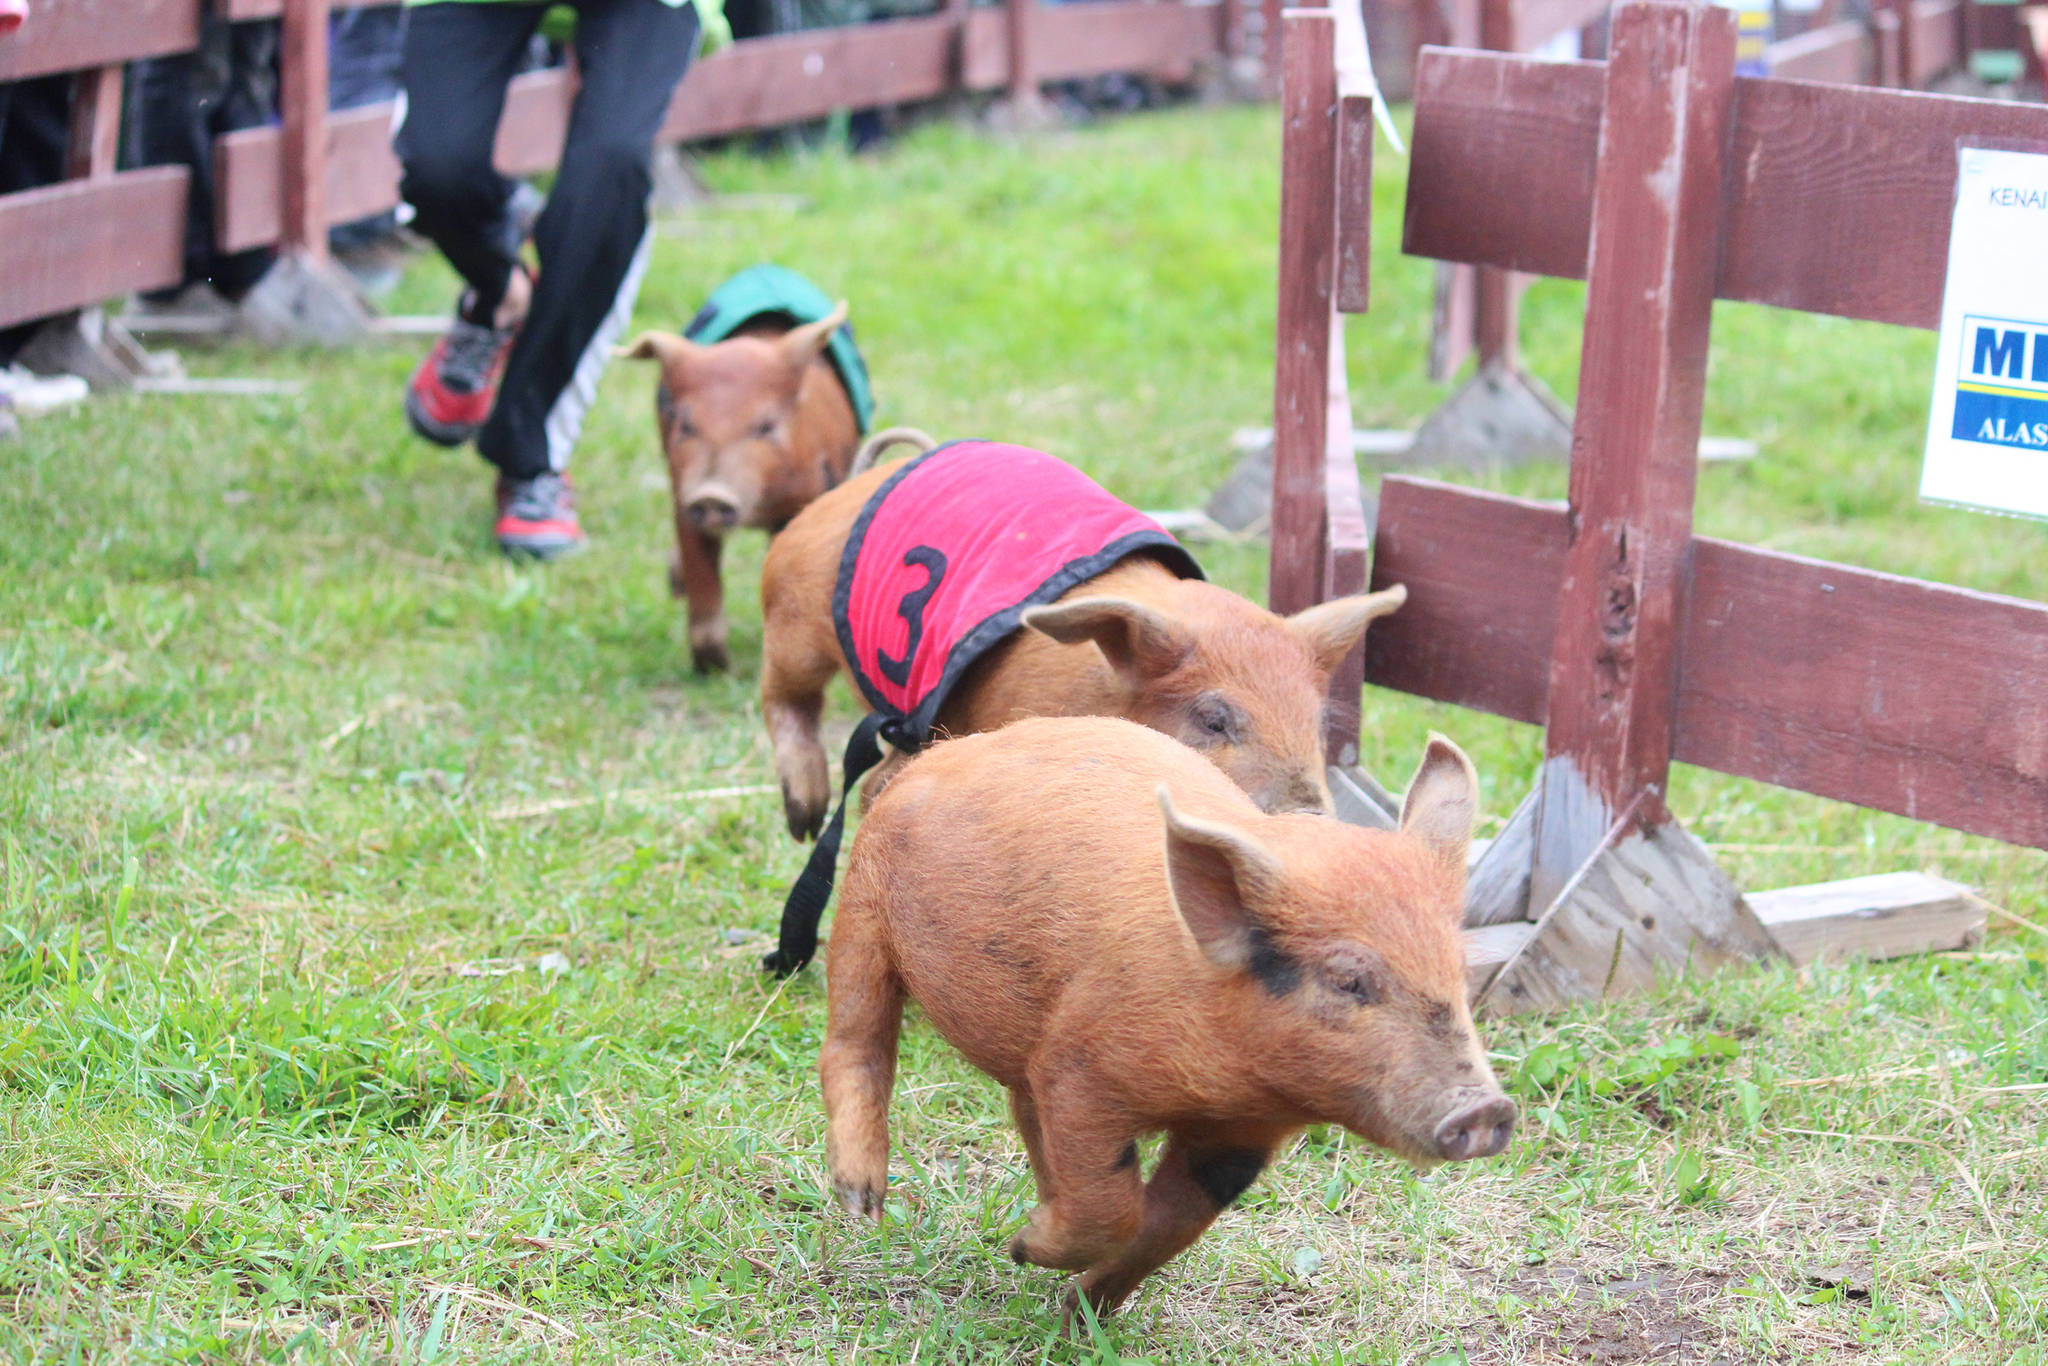 Pigs run through a circular course, chased by a young volunteer, during the pig races, held every year at the Kenai Peninsula Fair, on Saturday, Aug. 18, 2018 at the fairgrounds in Ninilchik, Alaska. (Photo by Megan Pacer/Homer News)